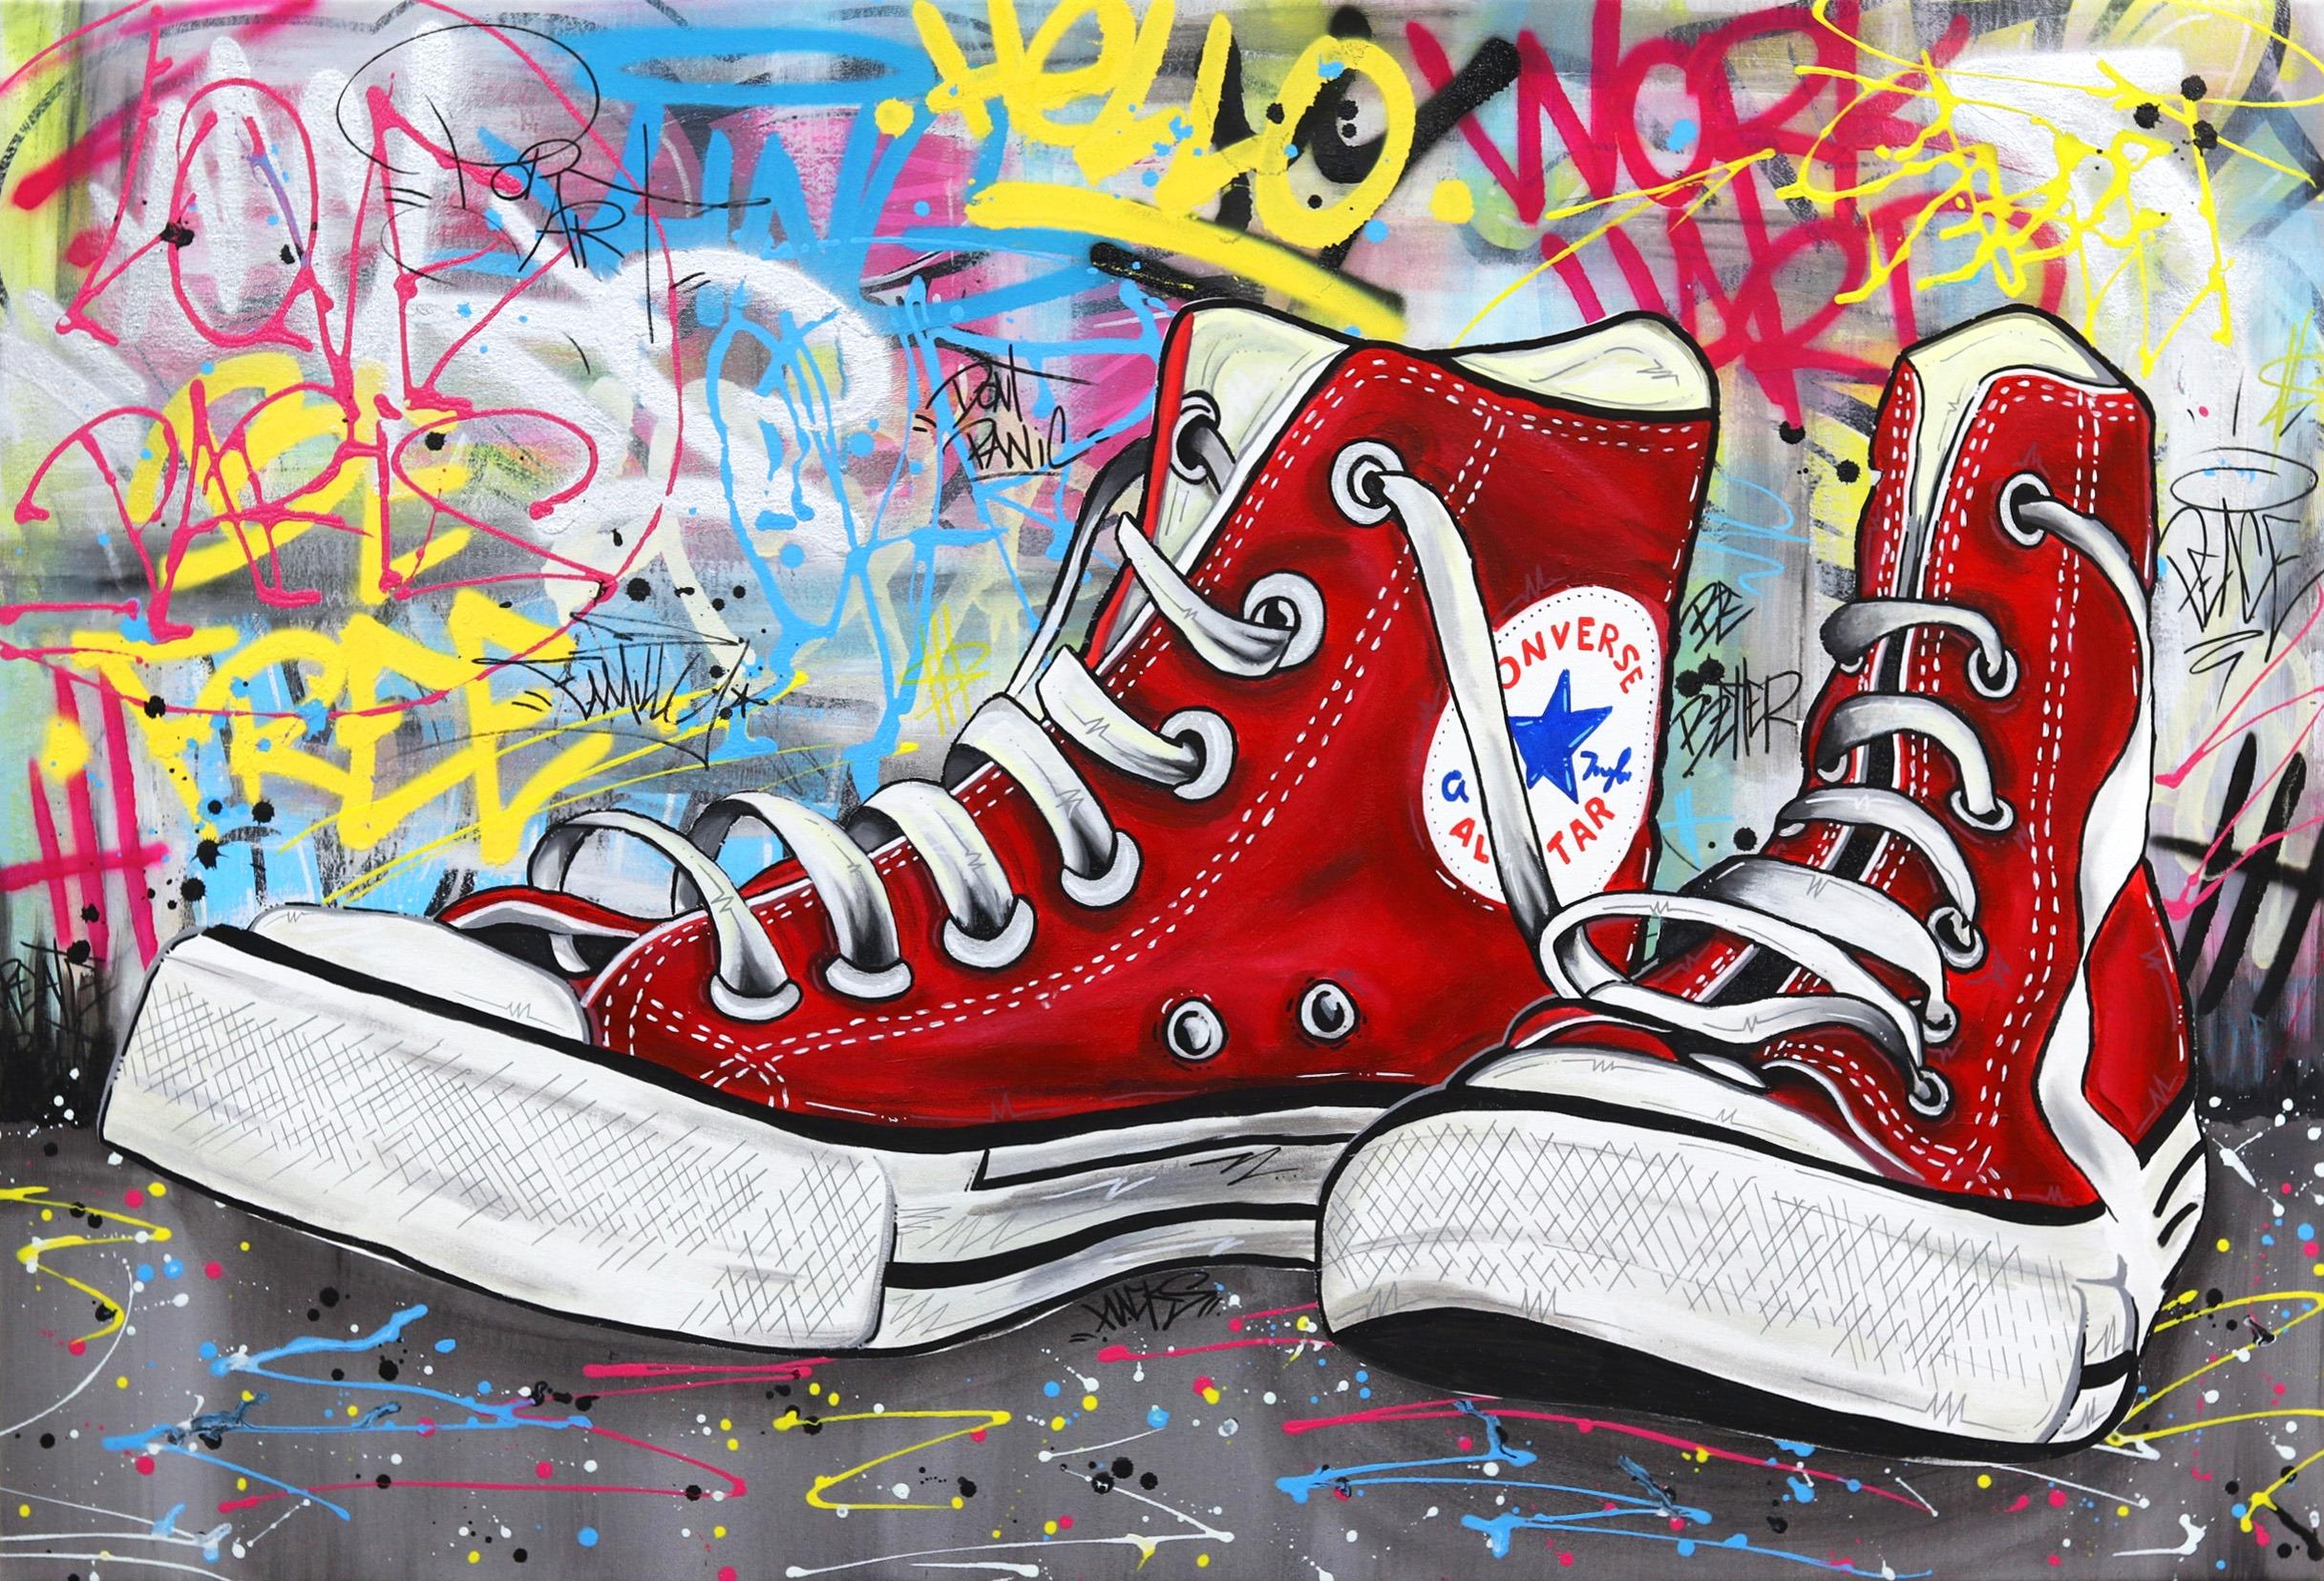 Naguy Claude - All Star - Original Converse Shoes Street Art Painting on  Canvas For Sale at 1stDibs | converse art, naguy, all stars painting